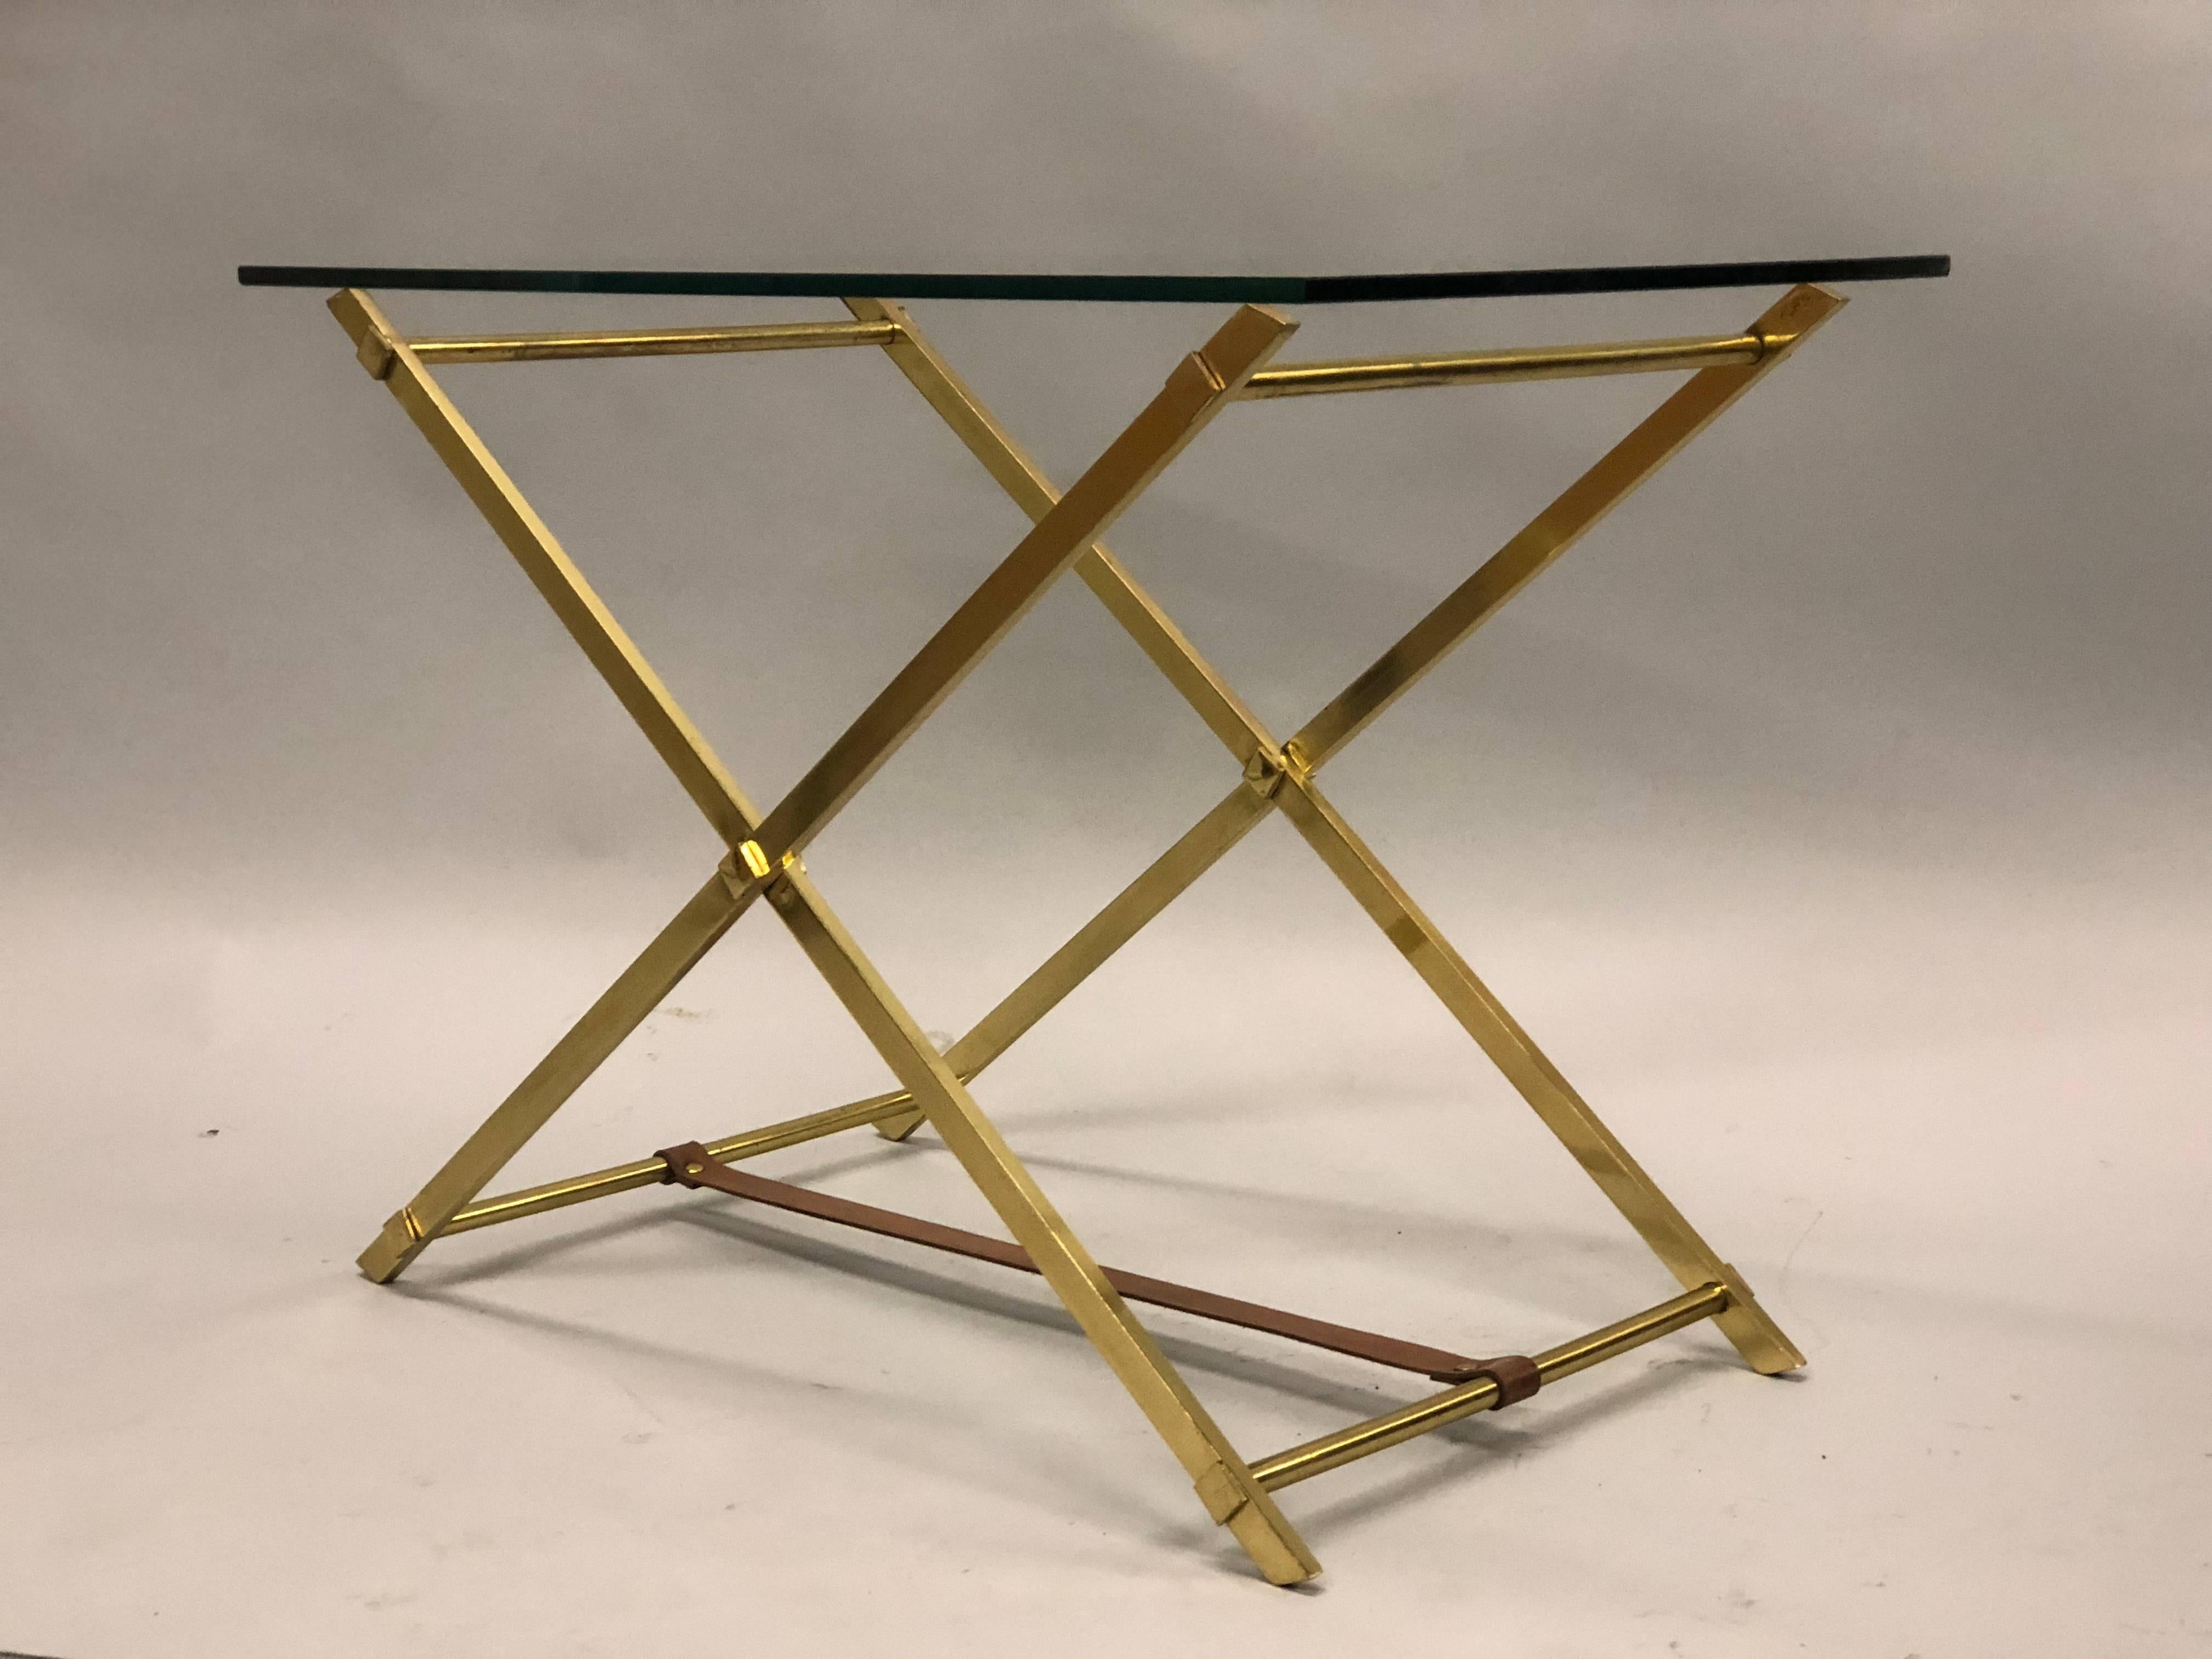 Elegant pair of French Mid-Century Modern neoclassical end tables by Hermes with solid brass frames in an X-frame form united by a leather stretcher supporting glass tops.